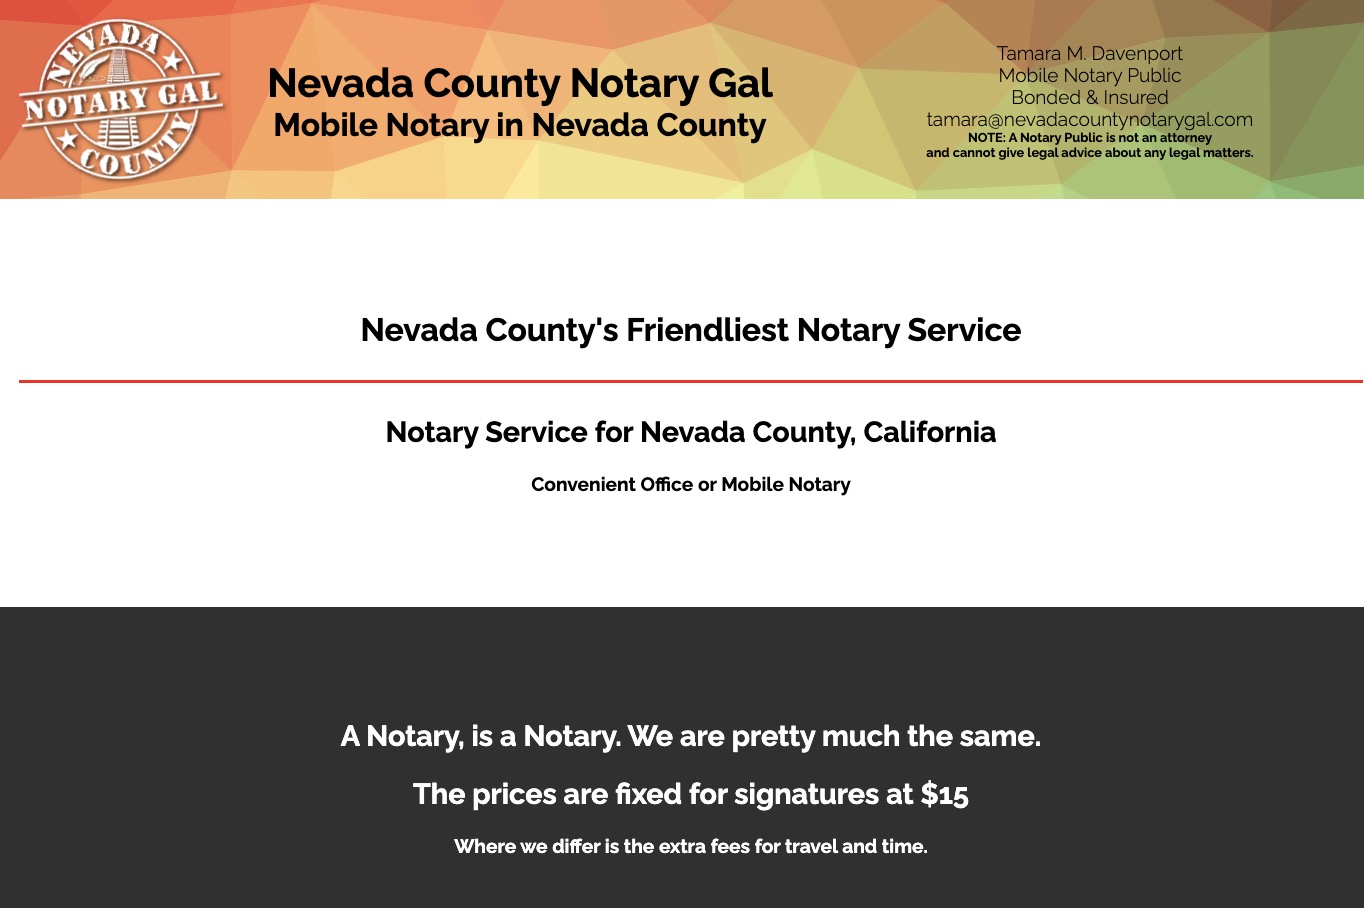 Nevada County Notary Gal website.